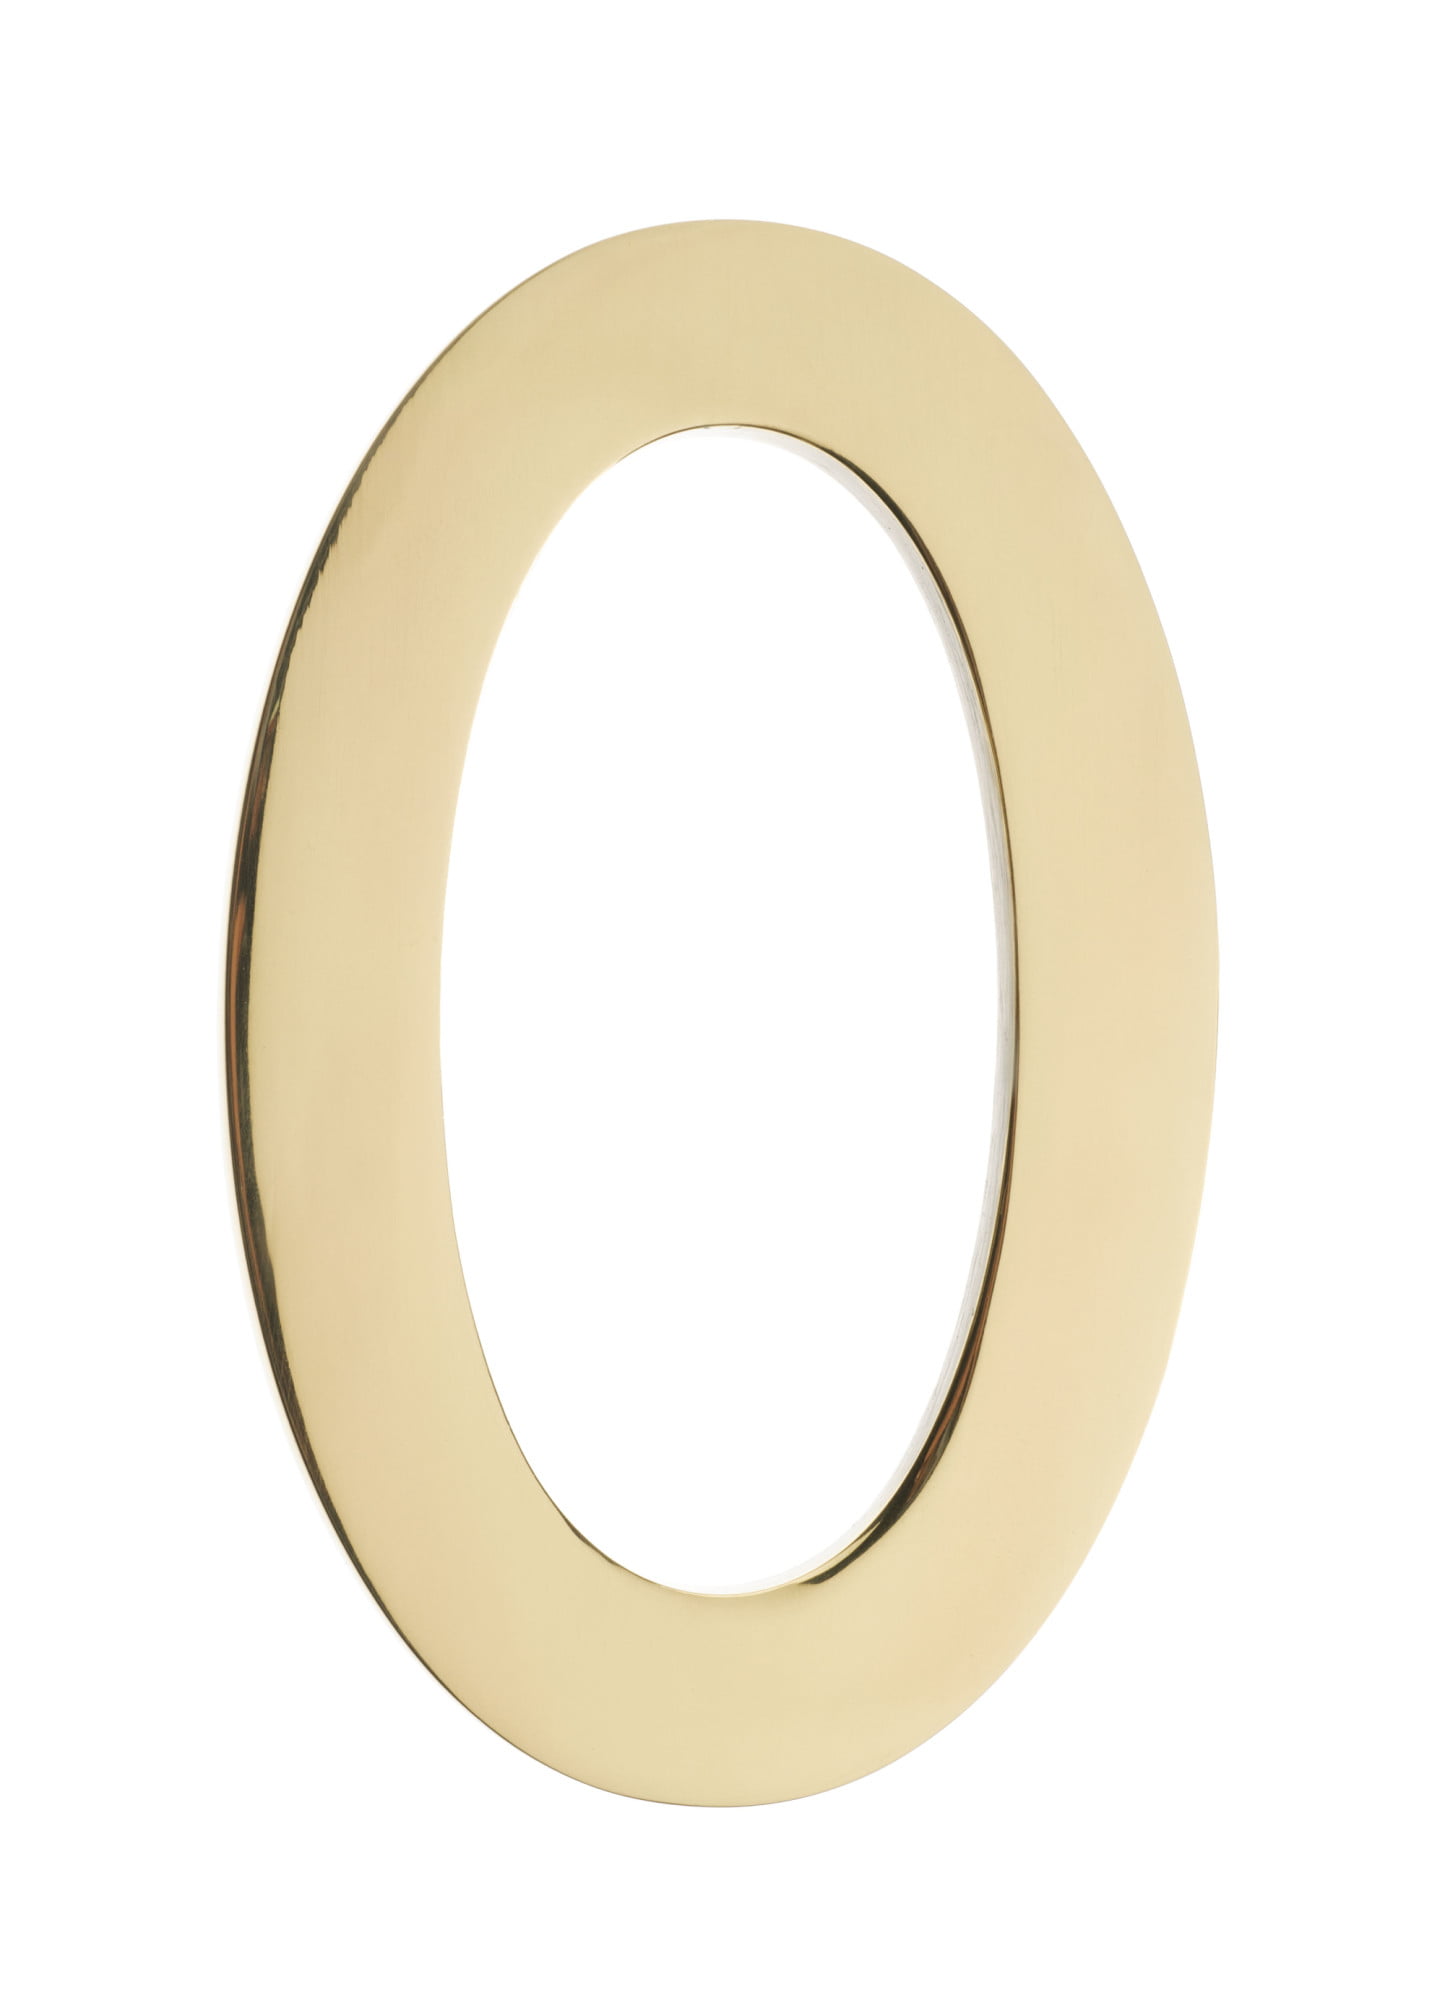 3585pb-0 House Number 0, Polished Brass - 5 In.